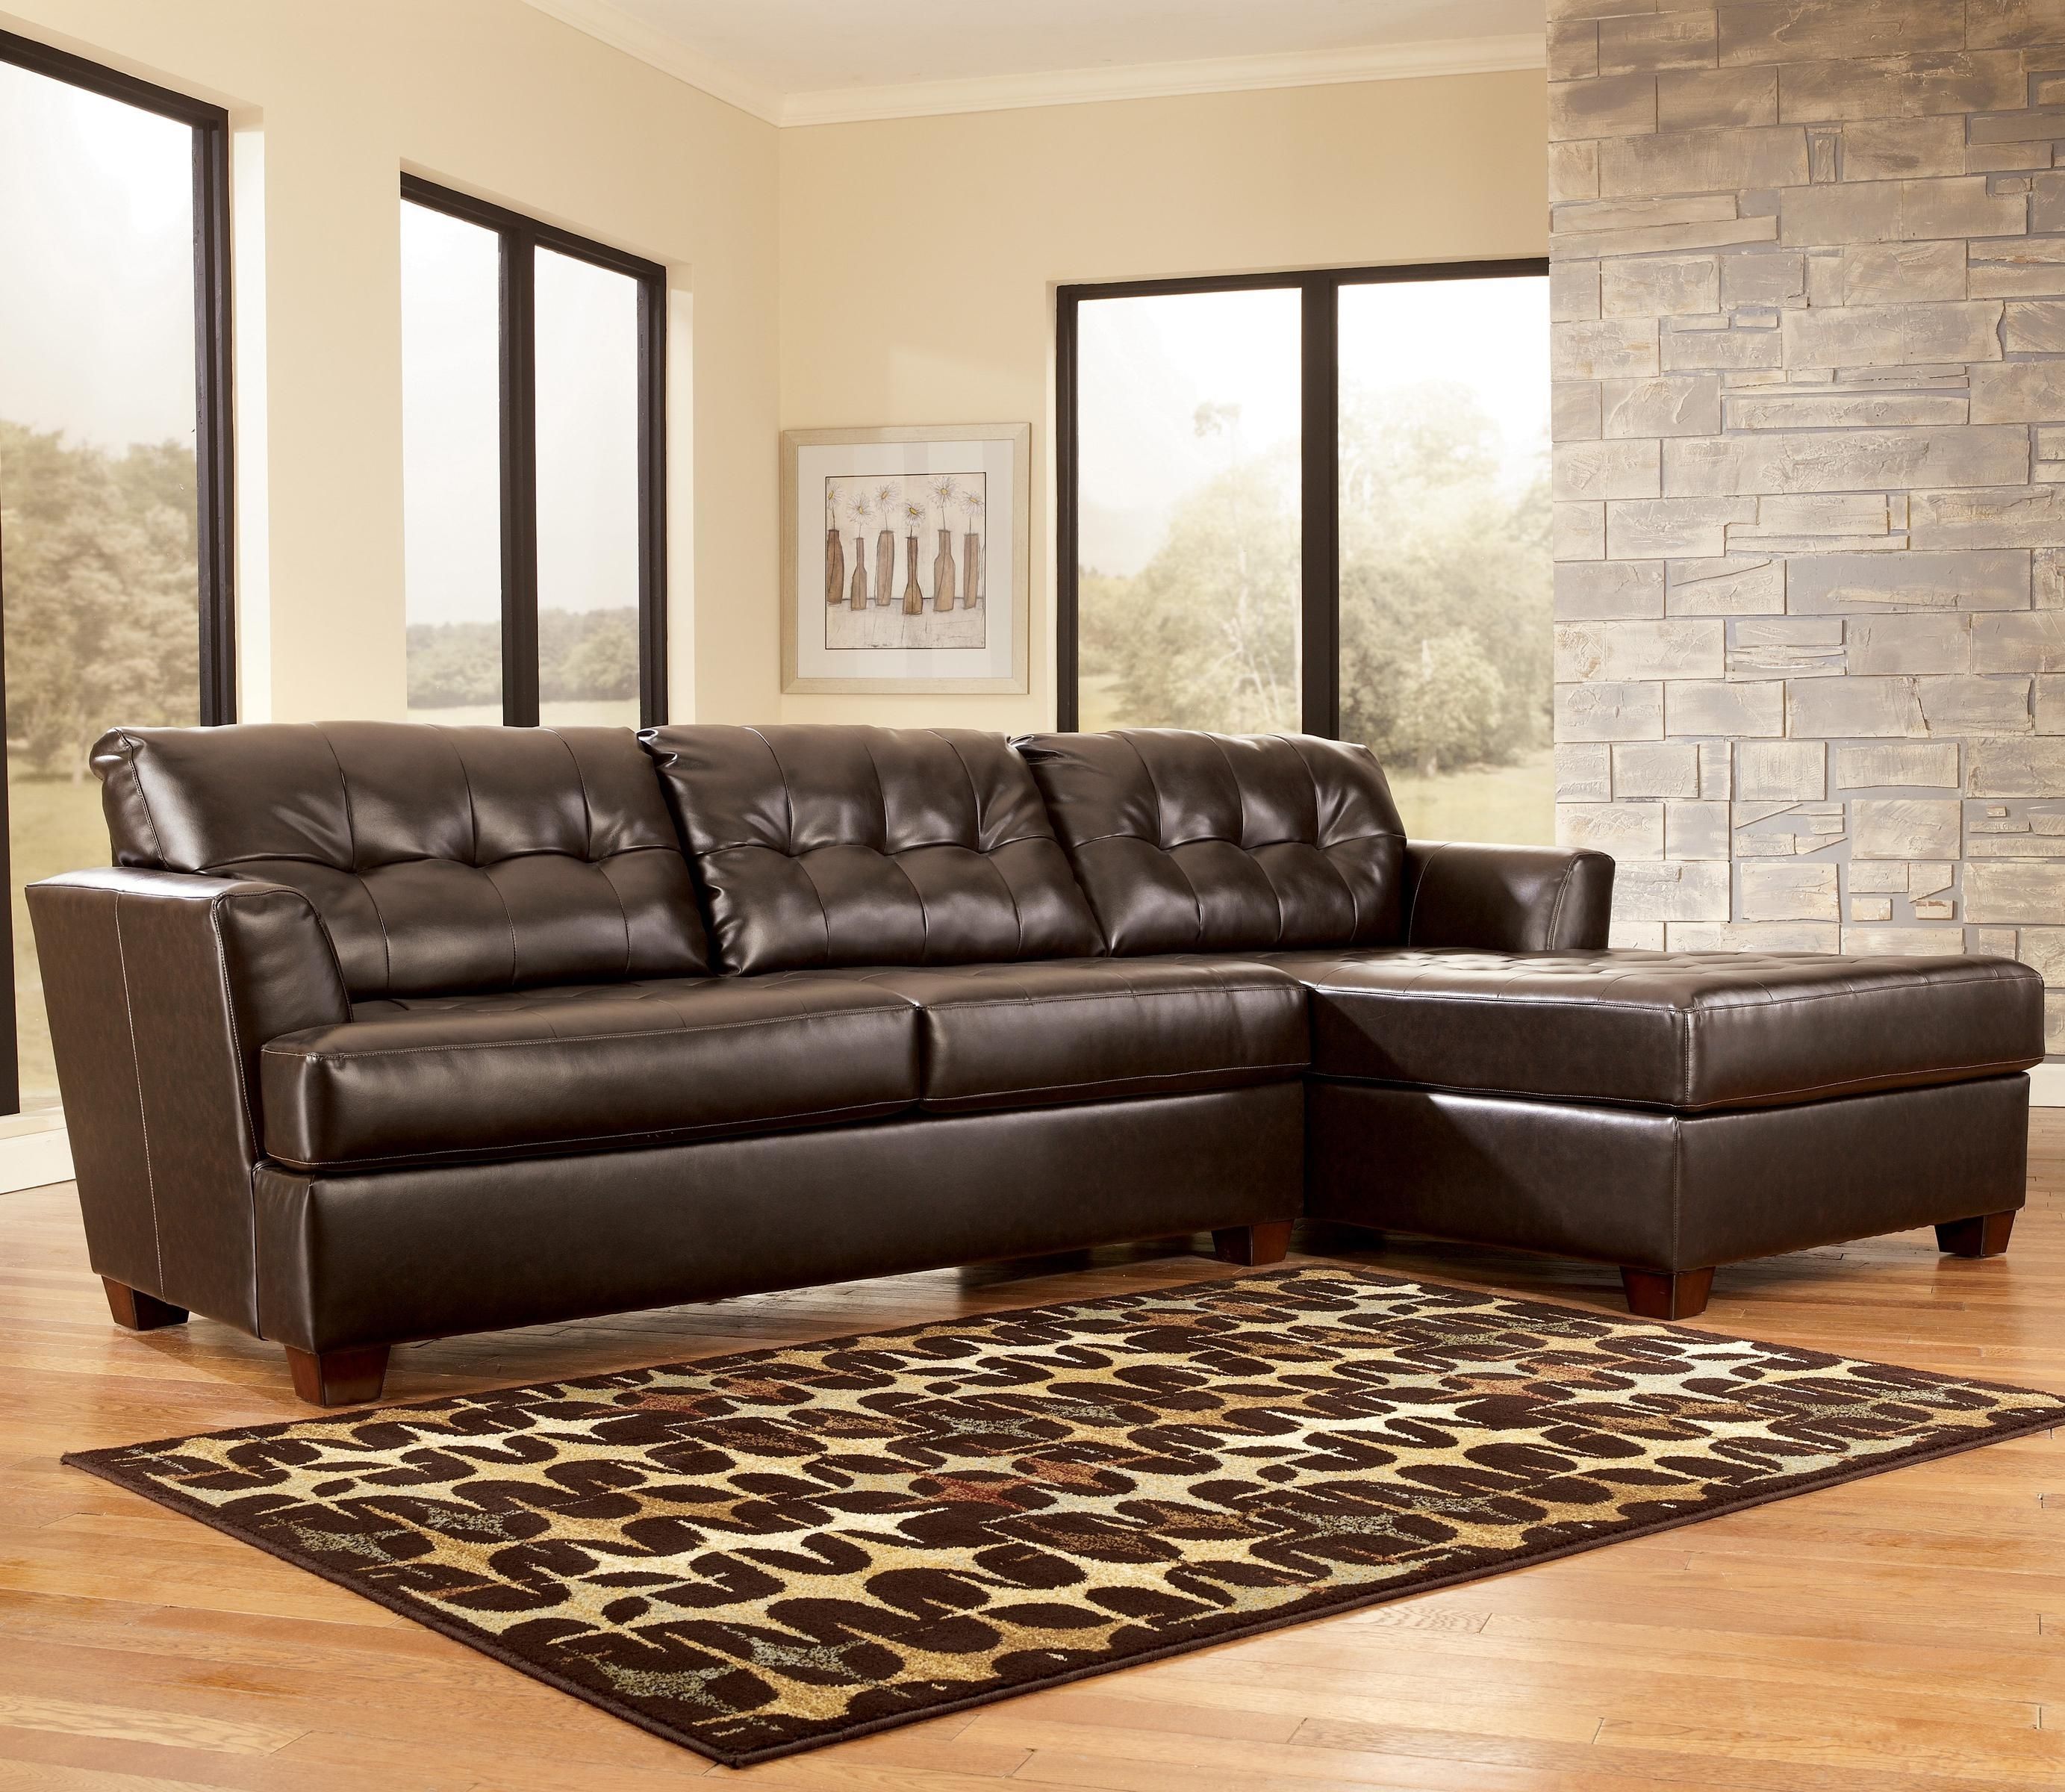 Cheap Sectional Sofas Knoxville Tn – 28 Images – Sectional Sofa Best In Knoxville Tn Sectional Sofas (Photo 1 of 10)